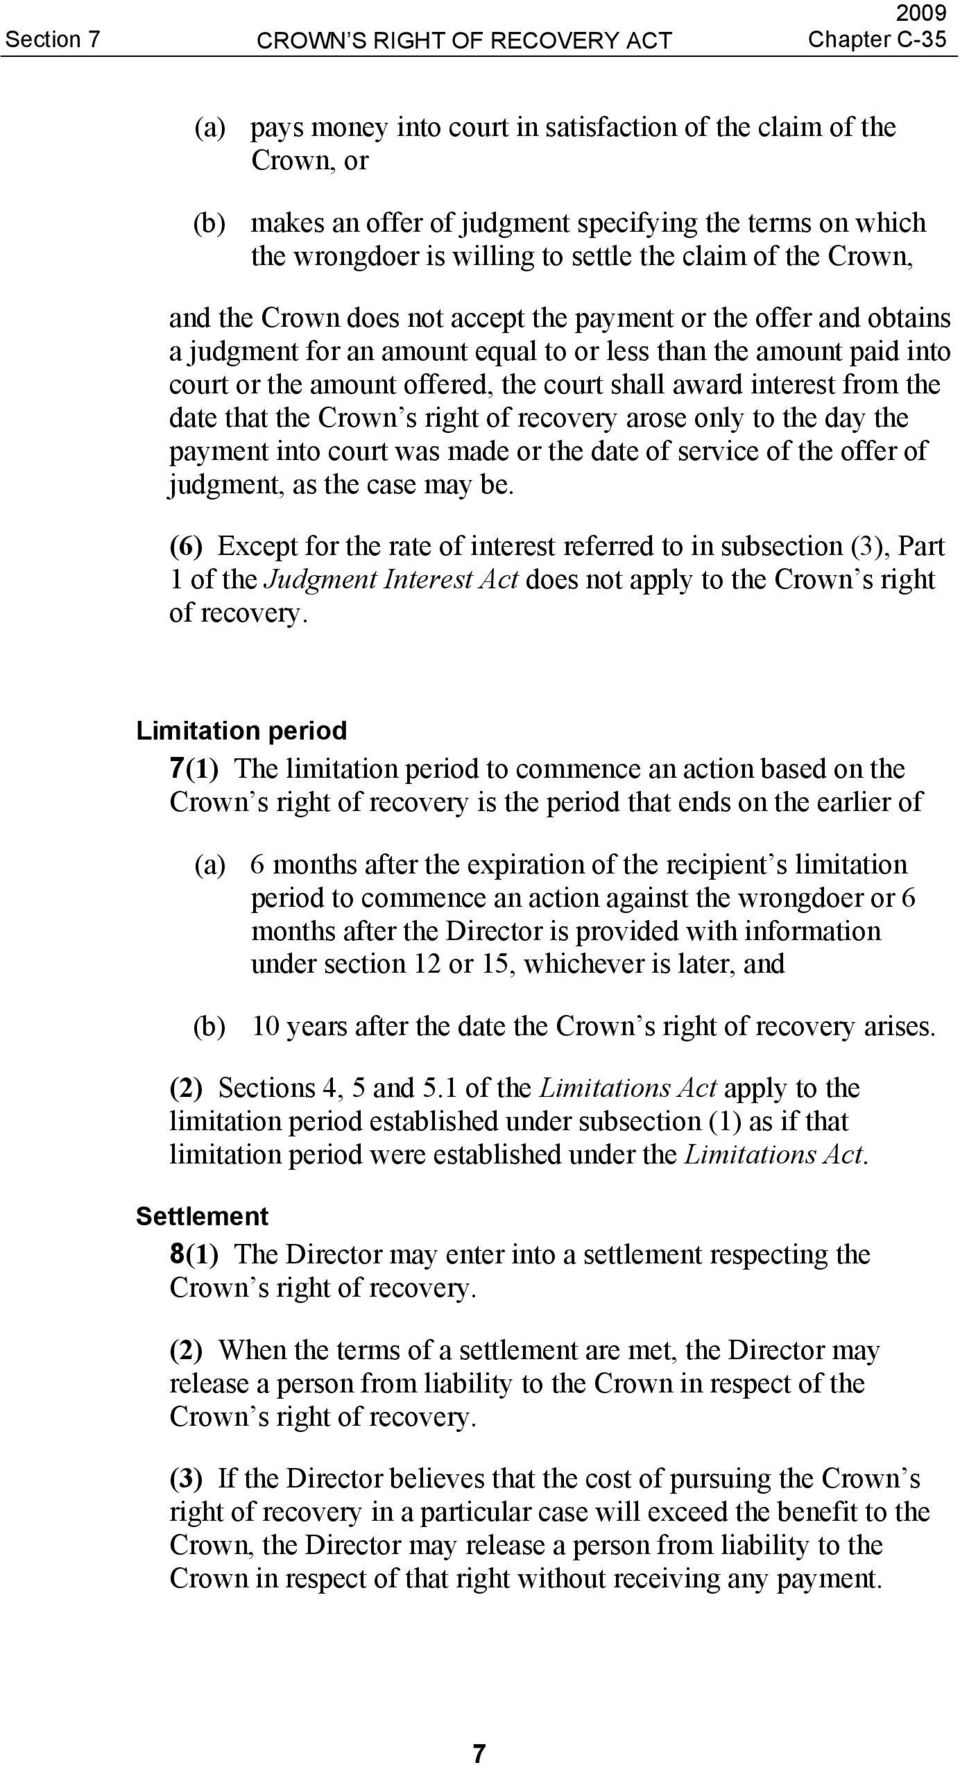 the court shall award interest from the date that the Crown s right of recovery arose only to the day the payment into court was made or the date of service of the offer of judgment, as the case may